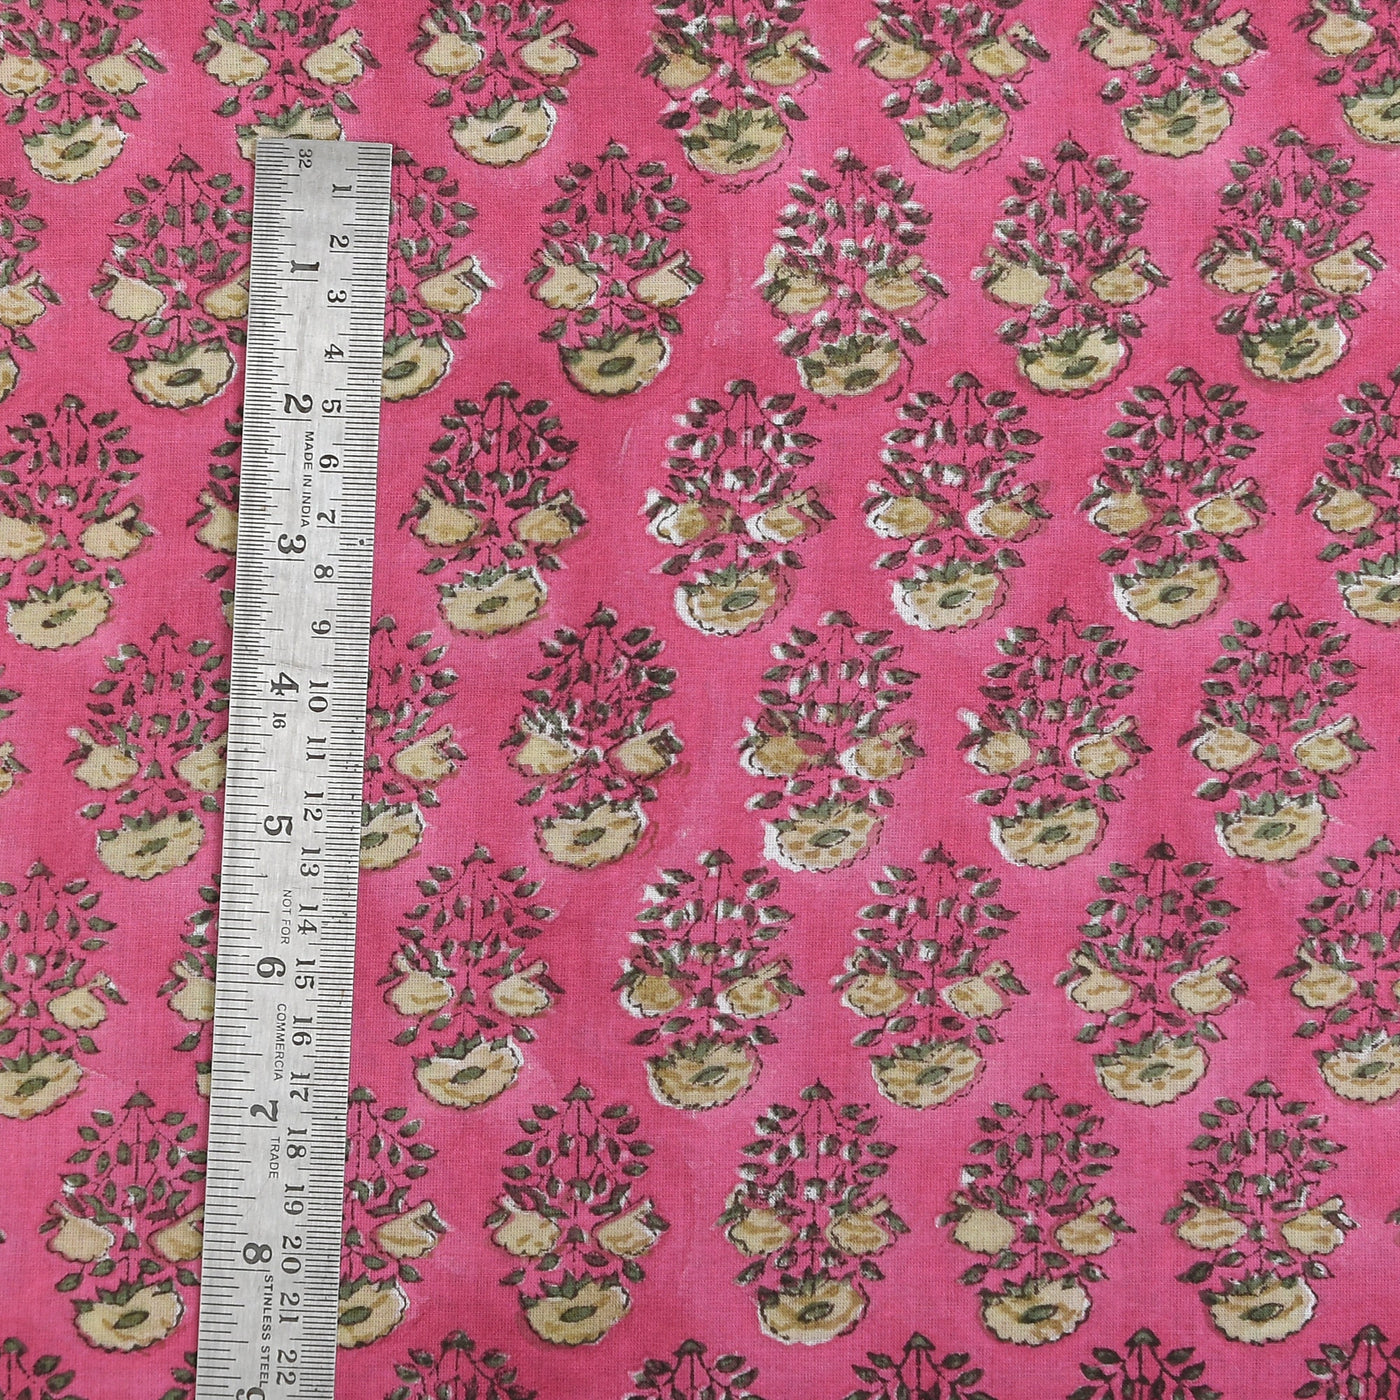 Thistle Purple, Laurel and Olive Green Indian Floral Block Printed Pure Cotton Cloth, Fabric by the yard, Women's Clothing Curtains Pillows